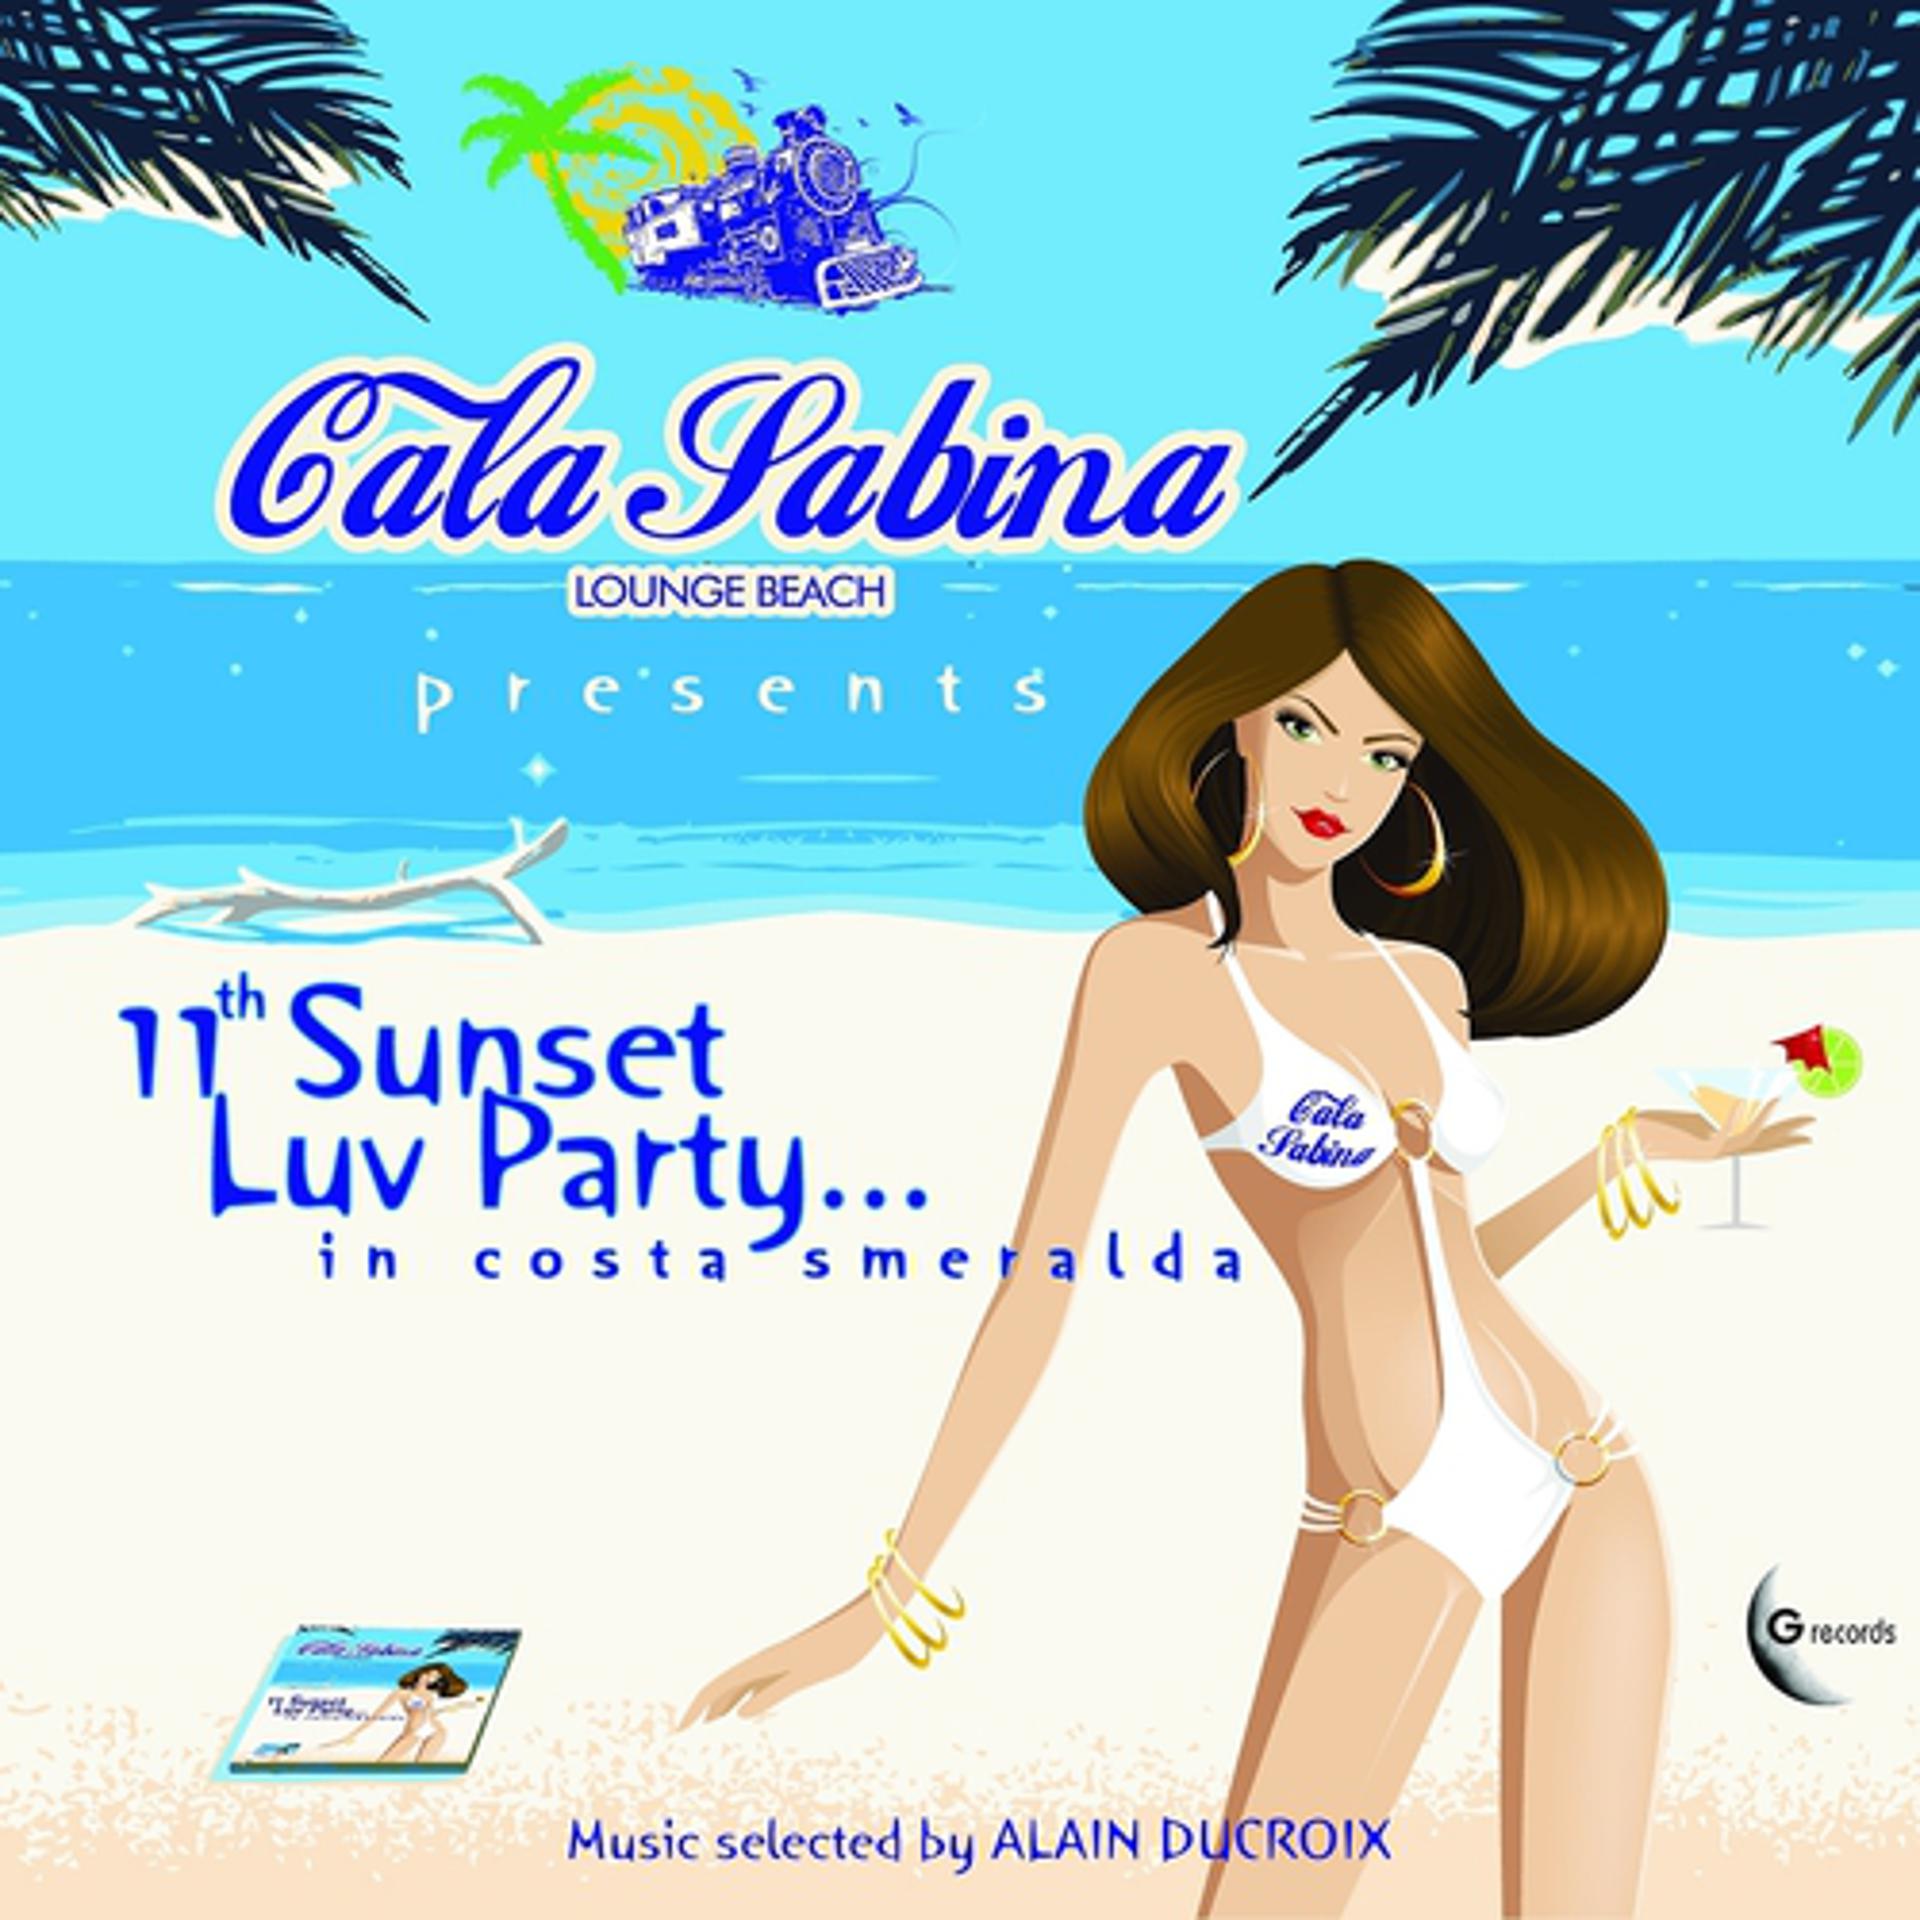 Постер альбома Cala Sabina Presents 11th Sunset Luv Party in Costa Smeralda (Music Selected by Alain Ducroix)